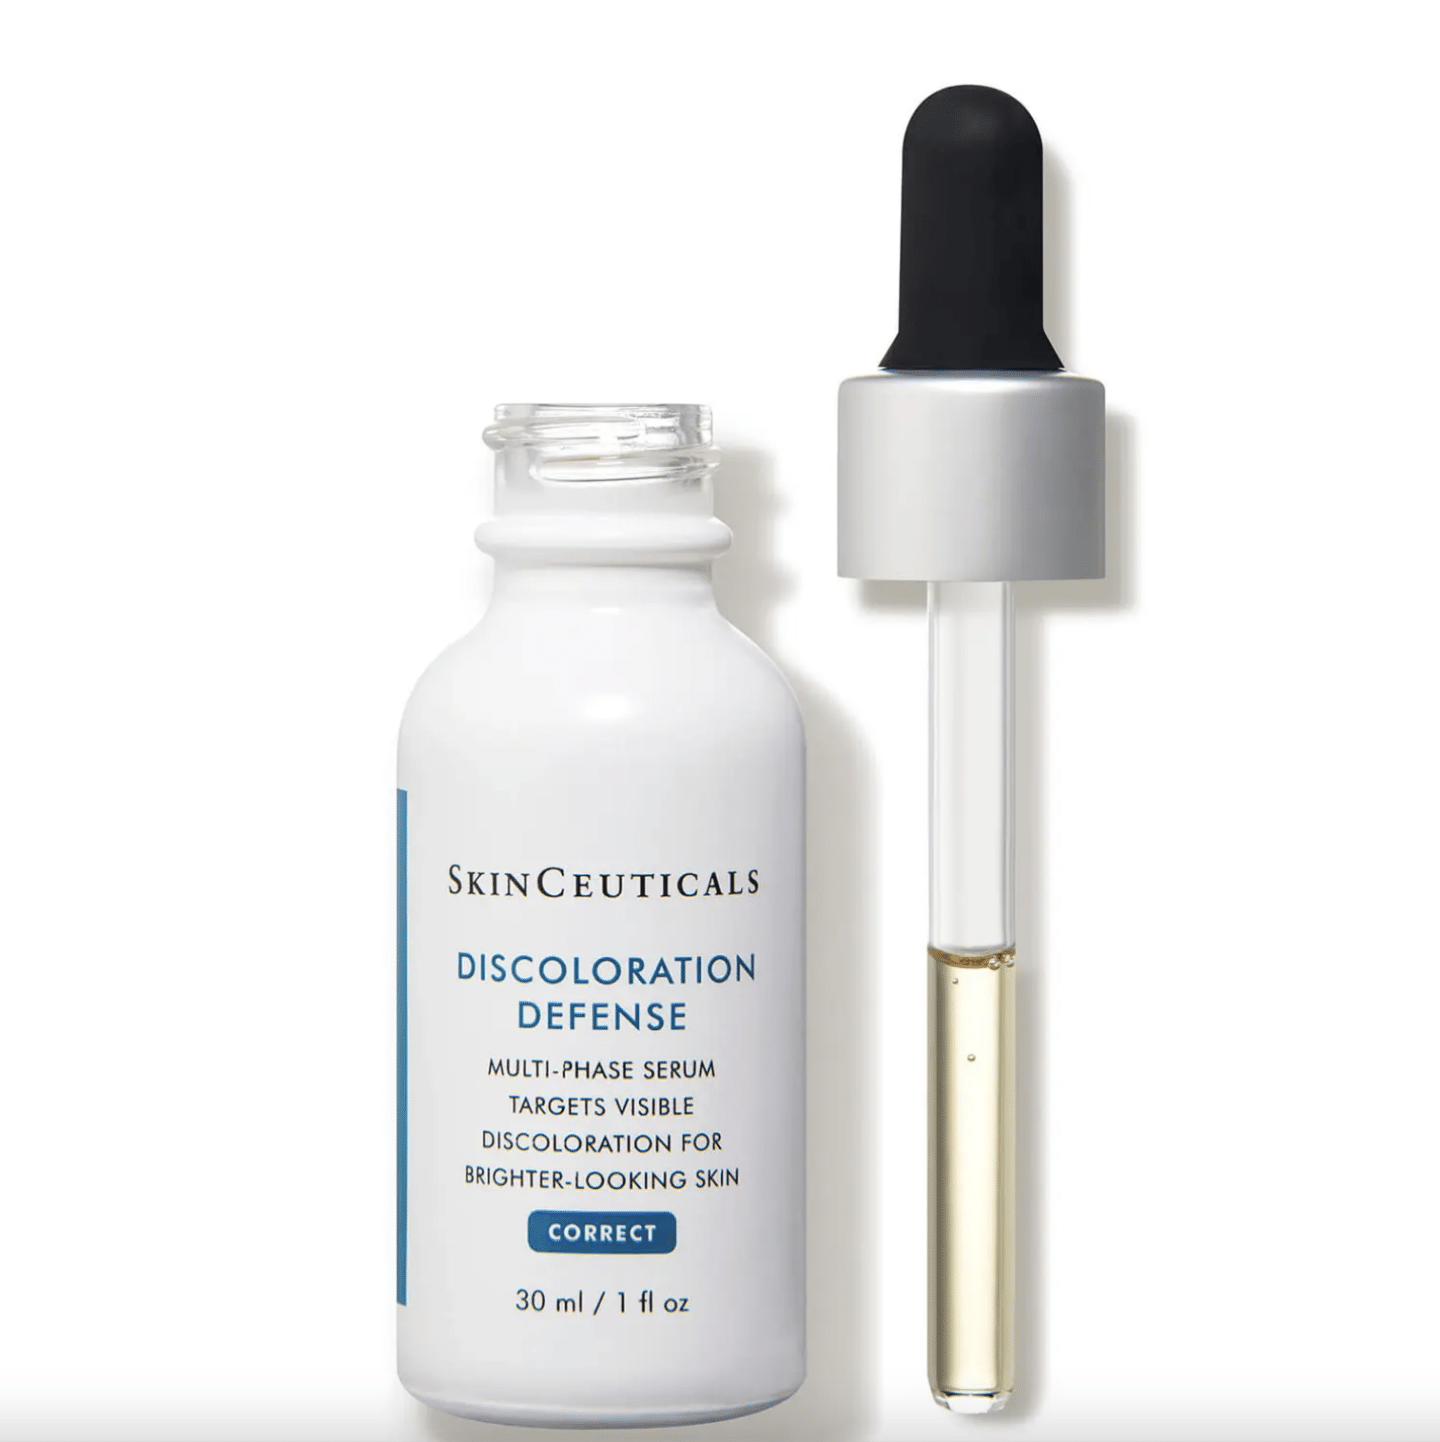 Niacinamide and retinol products, by beauty blogger What The Fab